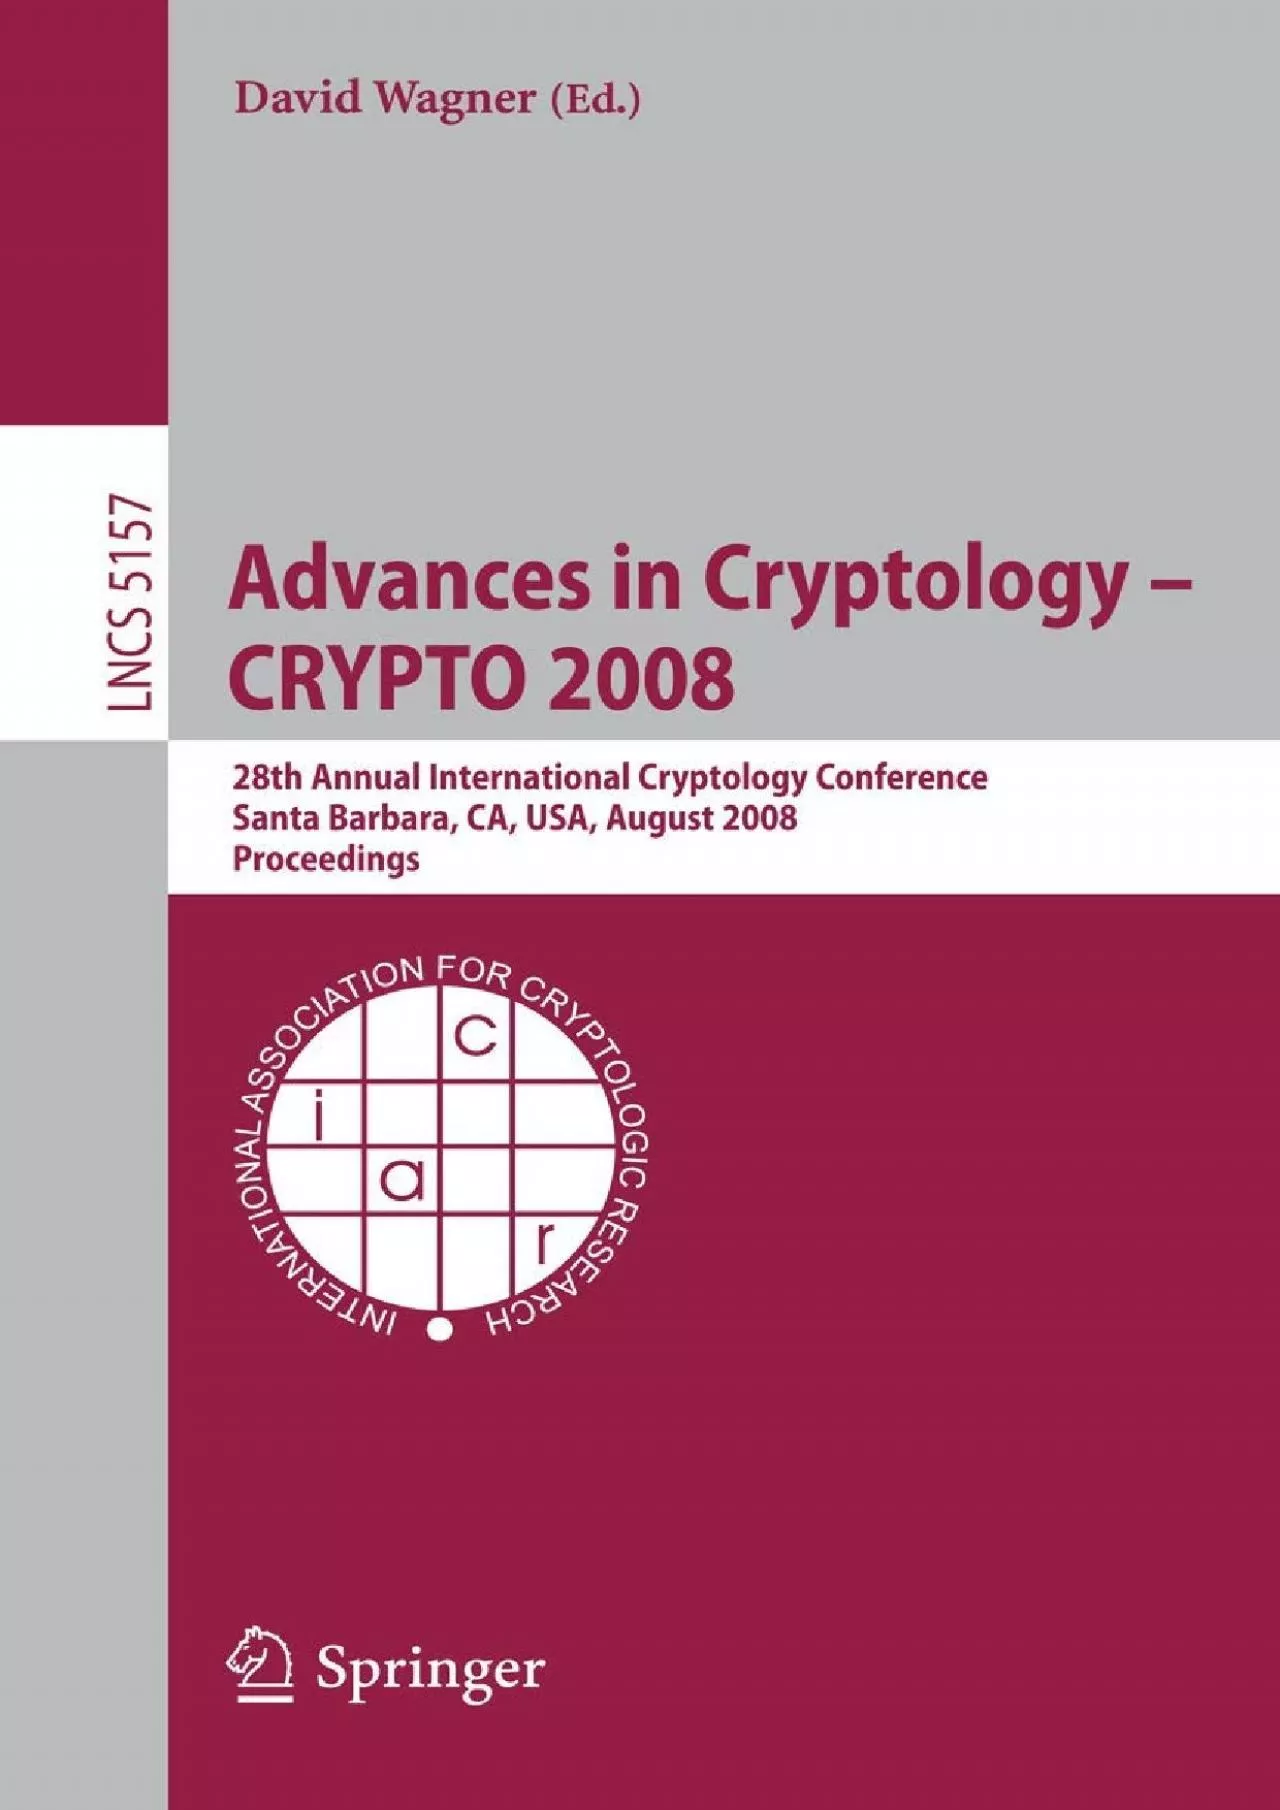 (BOOK)-Advances in Cryptology - CRYPTO 2008: 28th Annual International Cryptology Conference,